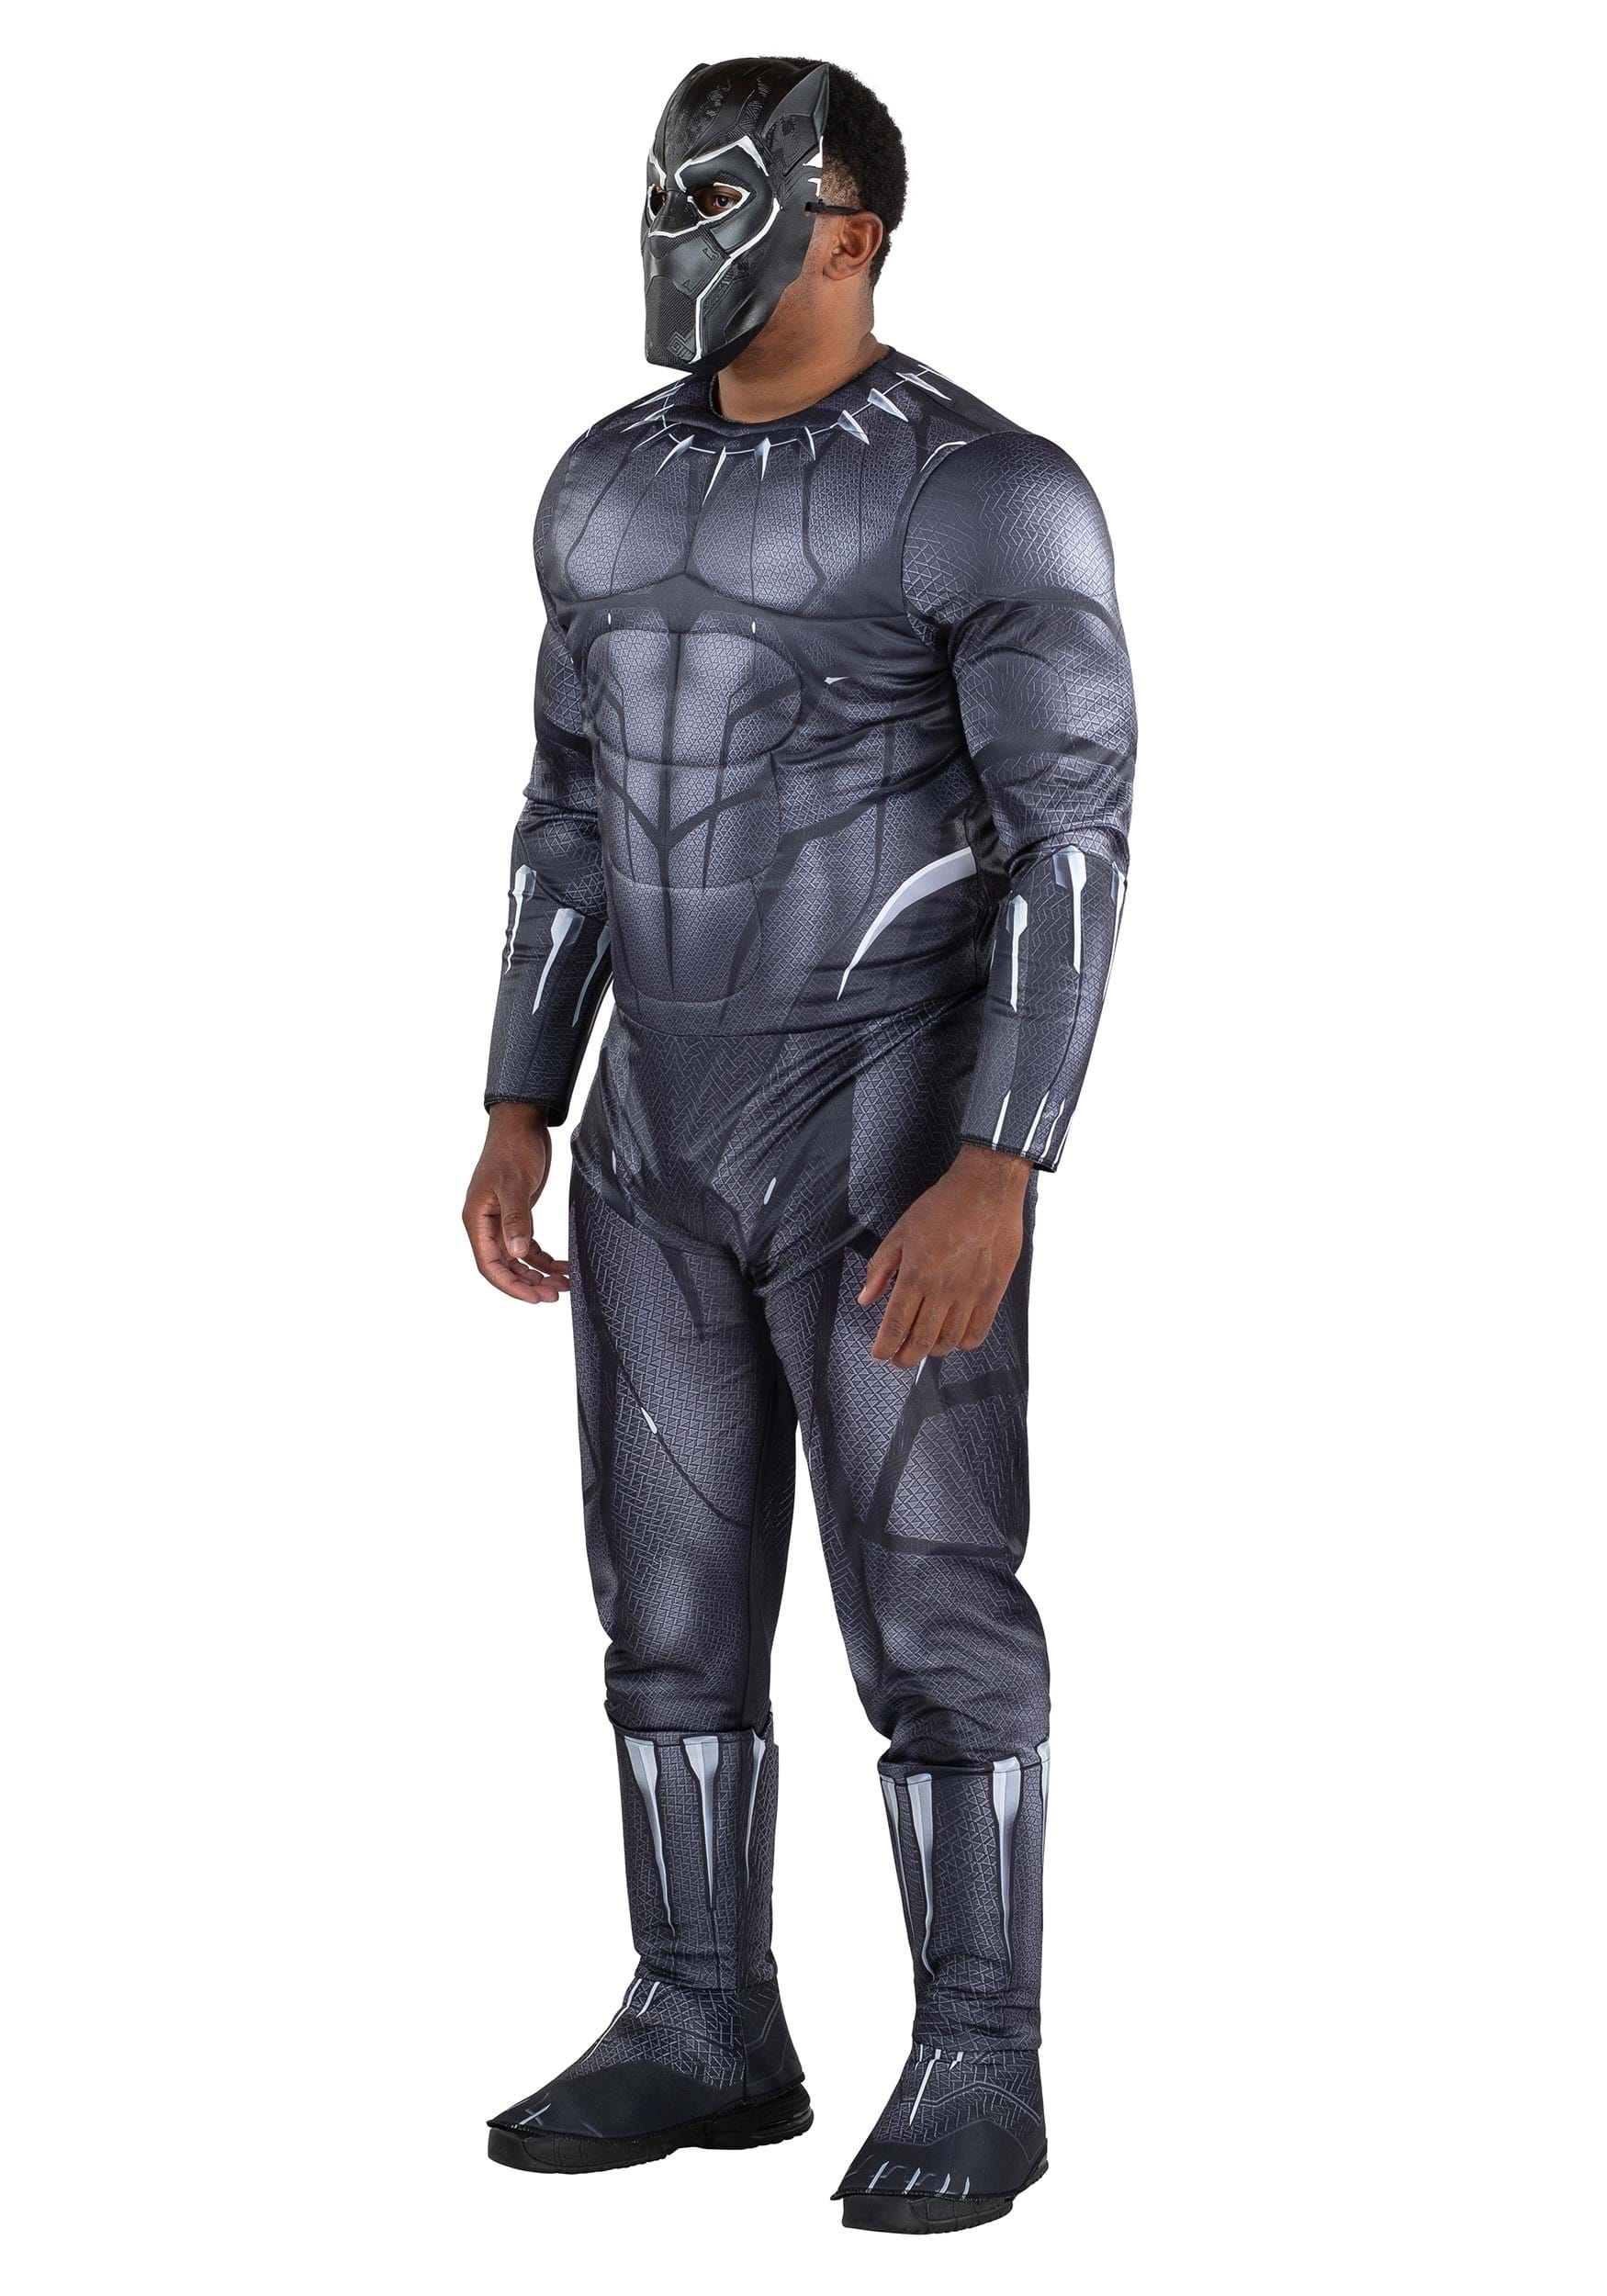 Black Panther Cosplay - Replica Suit  Black panther costume, Black panther,  Black panther marvel